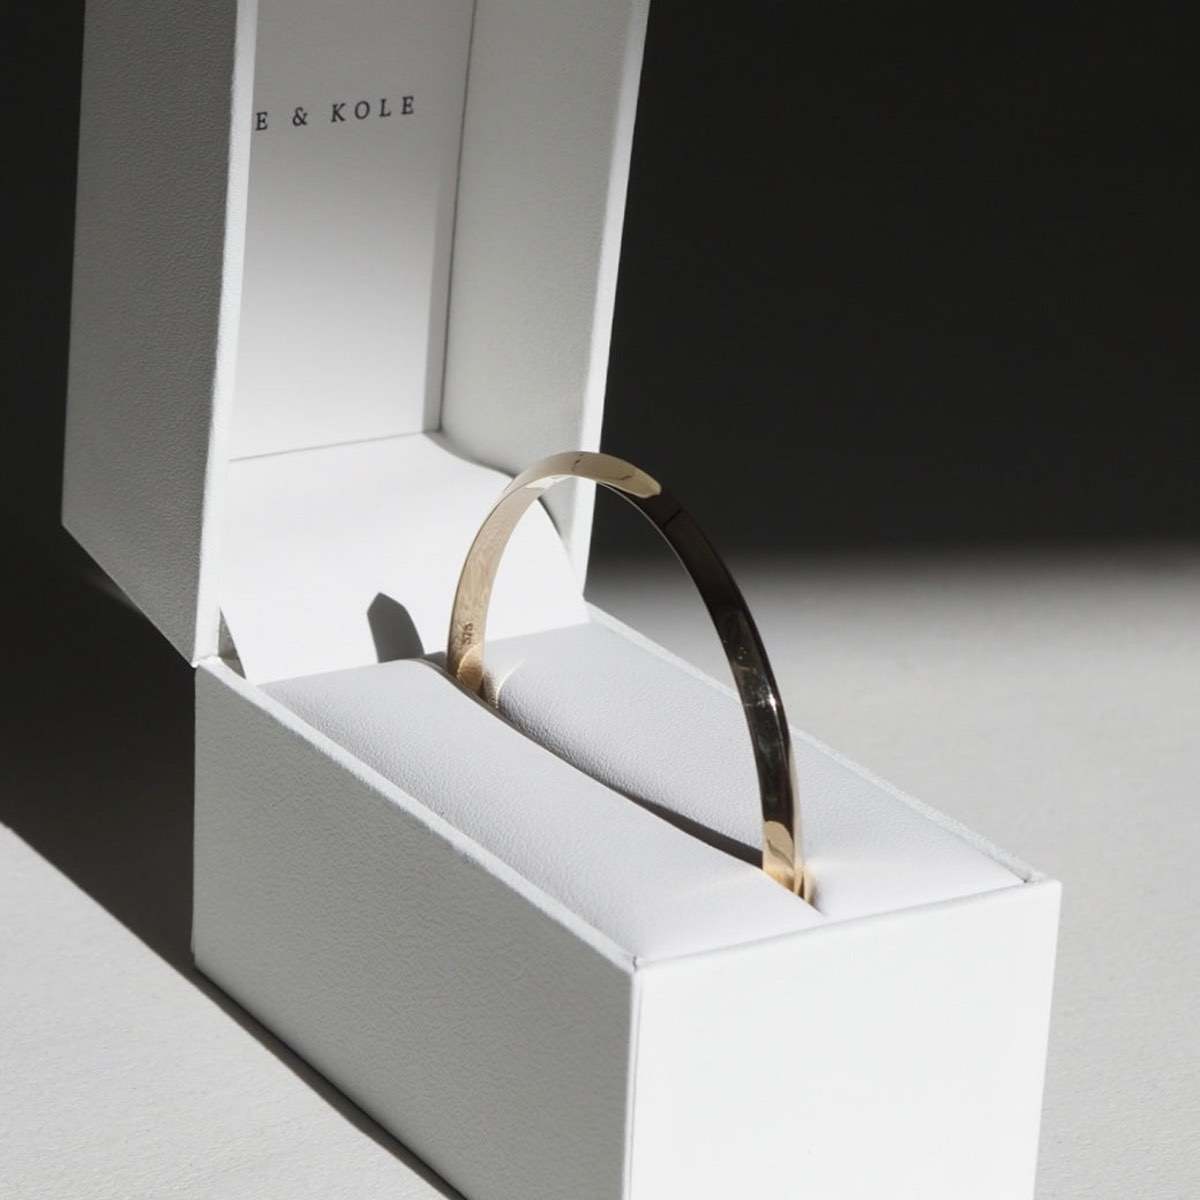 A 5mm 9ct yellow gold solid knife edge bangle sitting perfectly in our Kate & Kole jewellery box